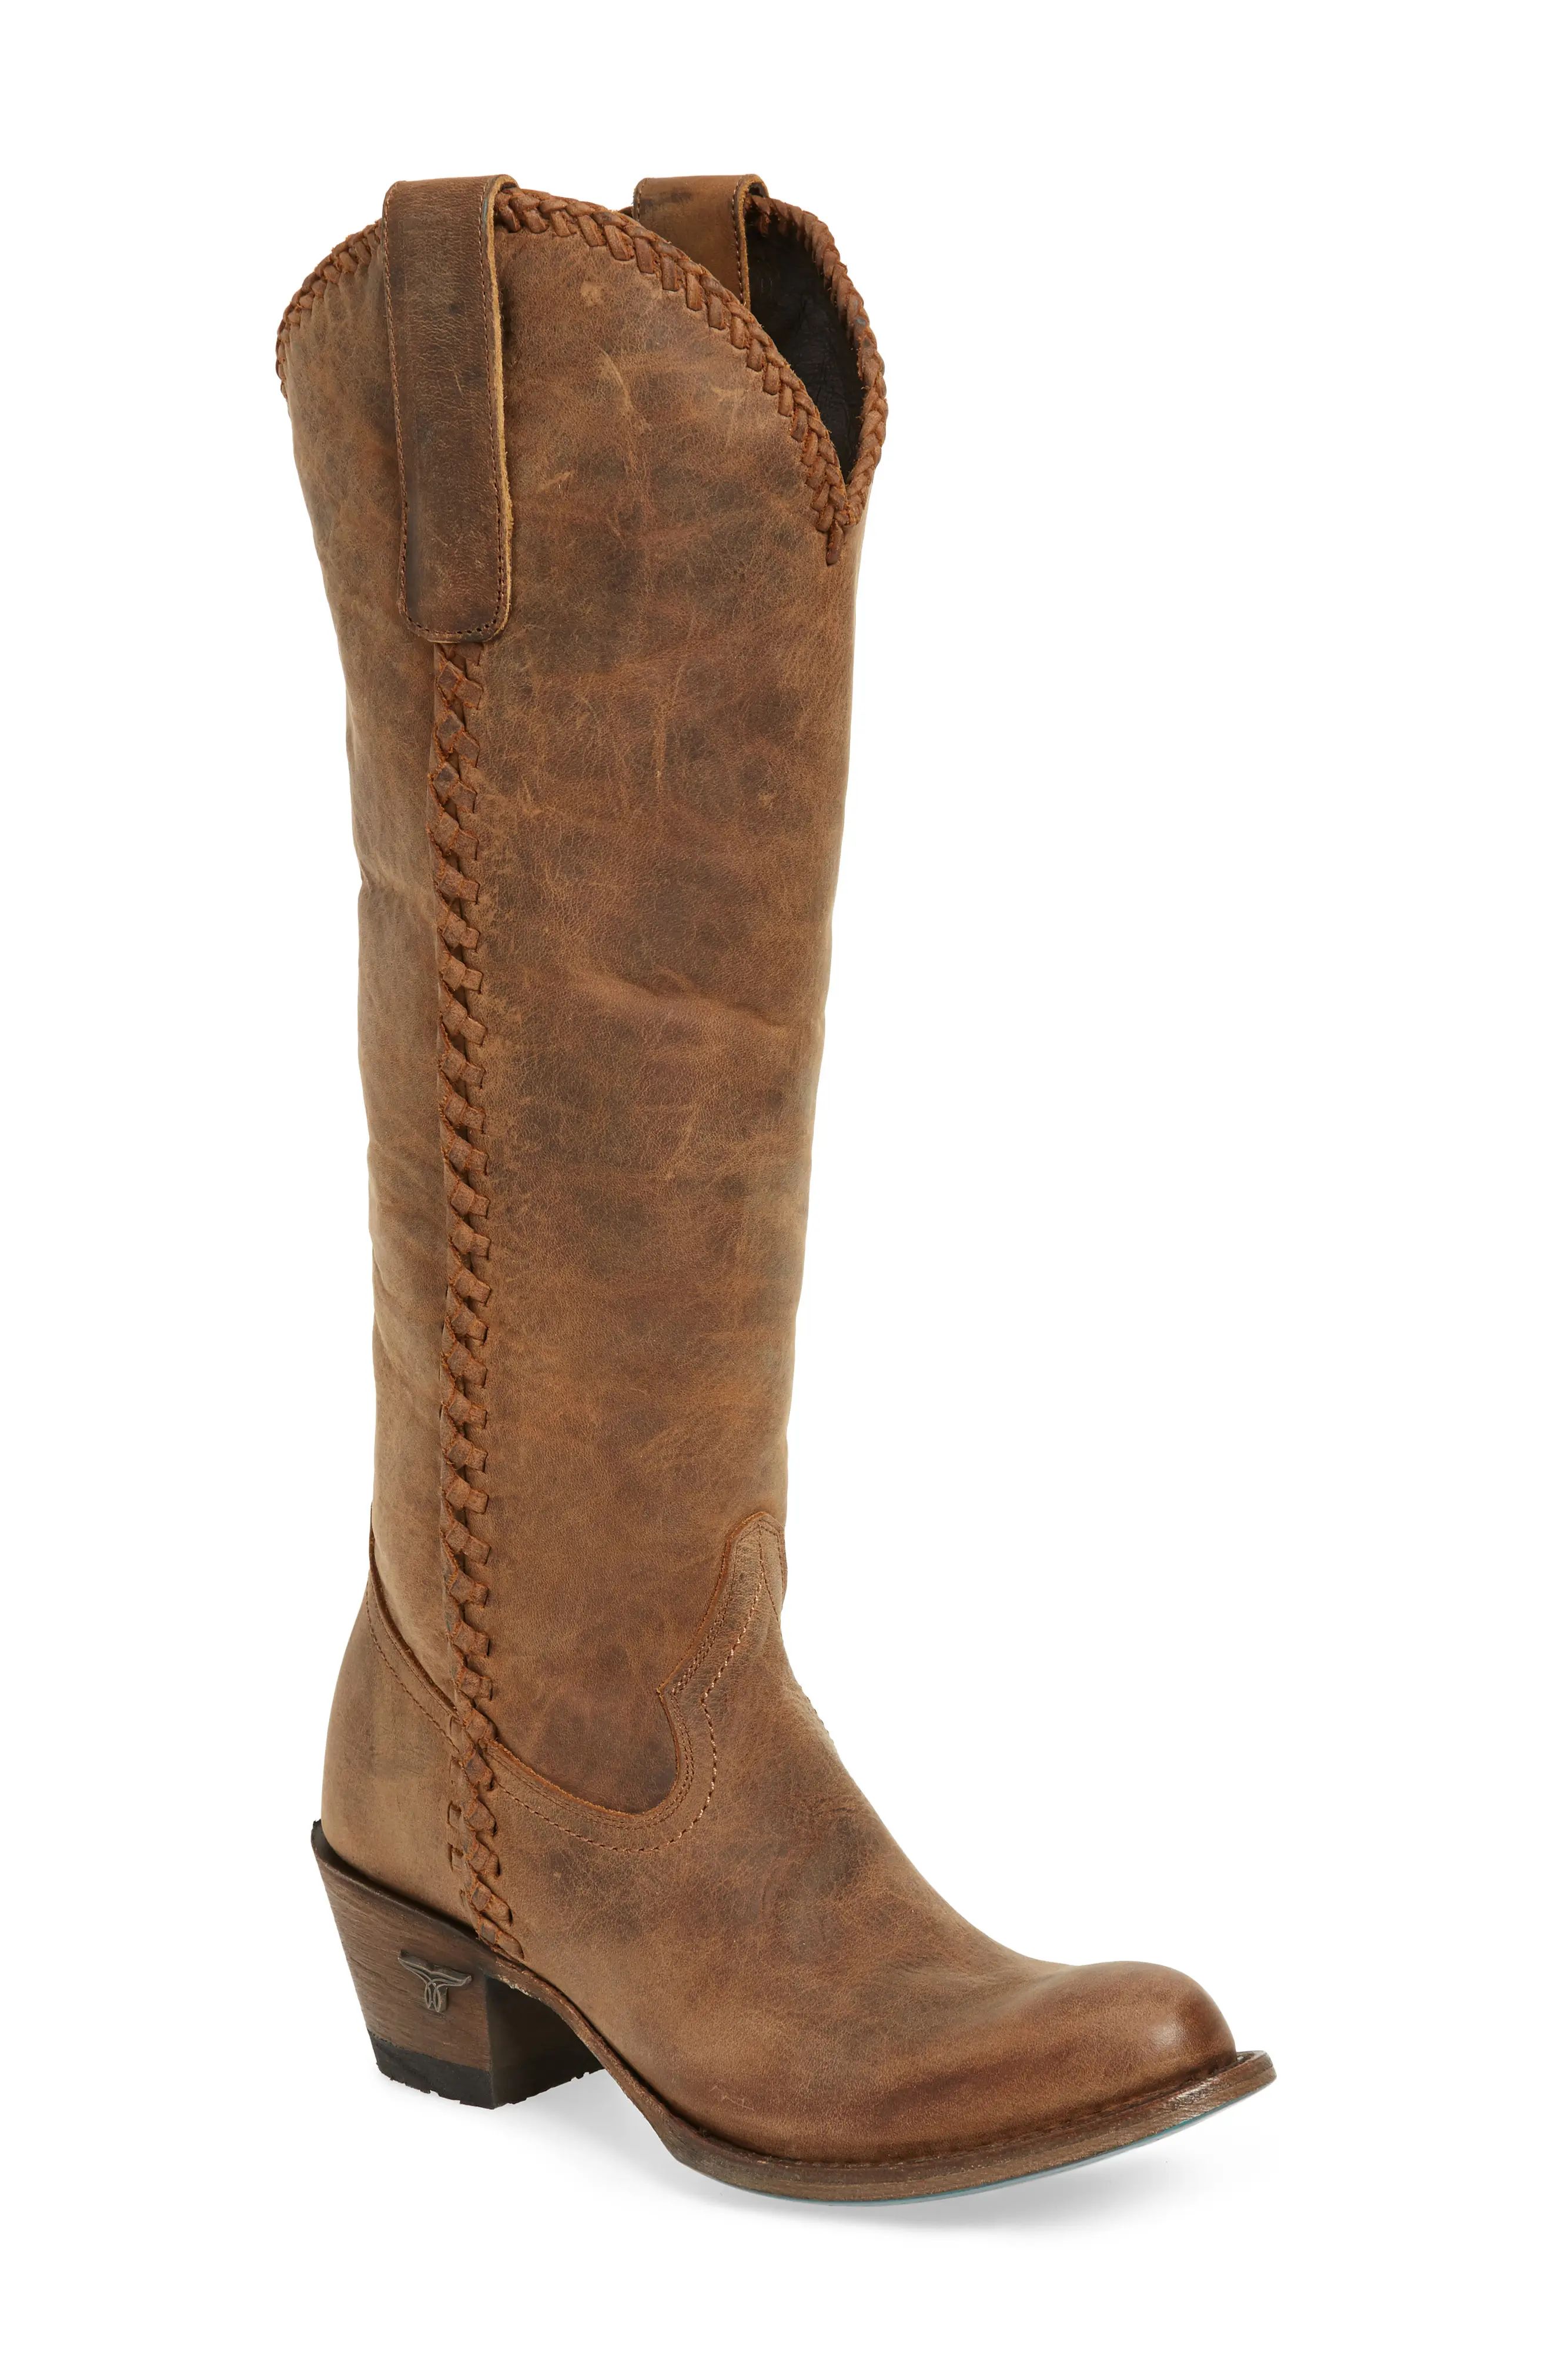 Lane Boots Plain Jane Knee High Western Boot, Size 6.5 in Oiled Brown Leather at Nordstrom | Nordstrom